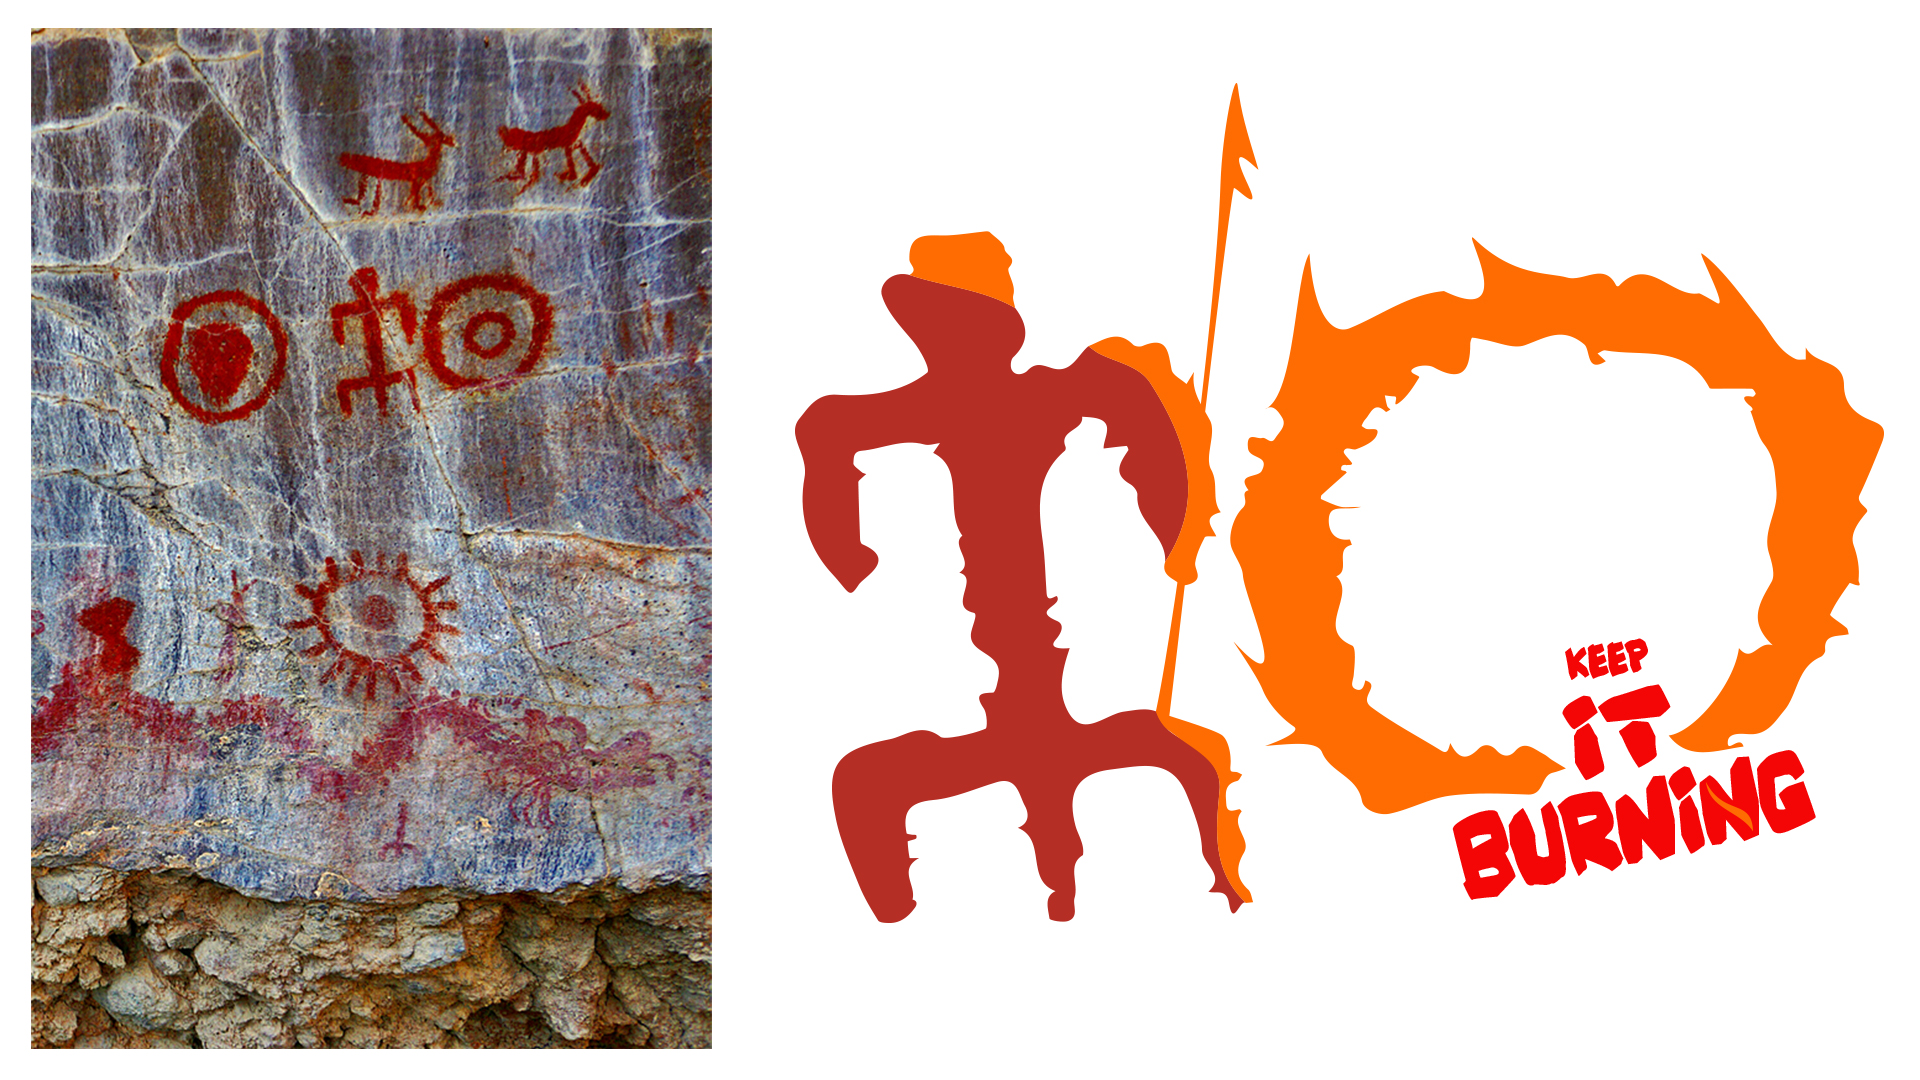 Fig 2 - Ancient cave paintings from Hidalgo's Cave in Mexico and the logo I design upon them